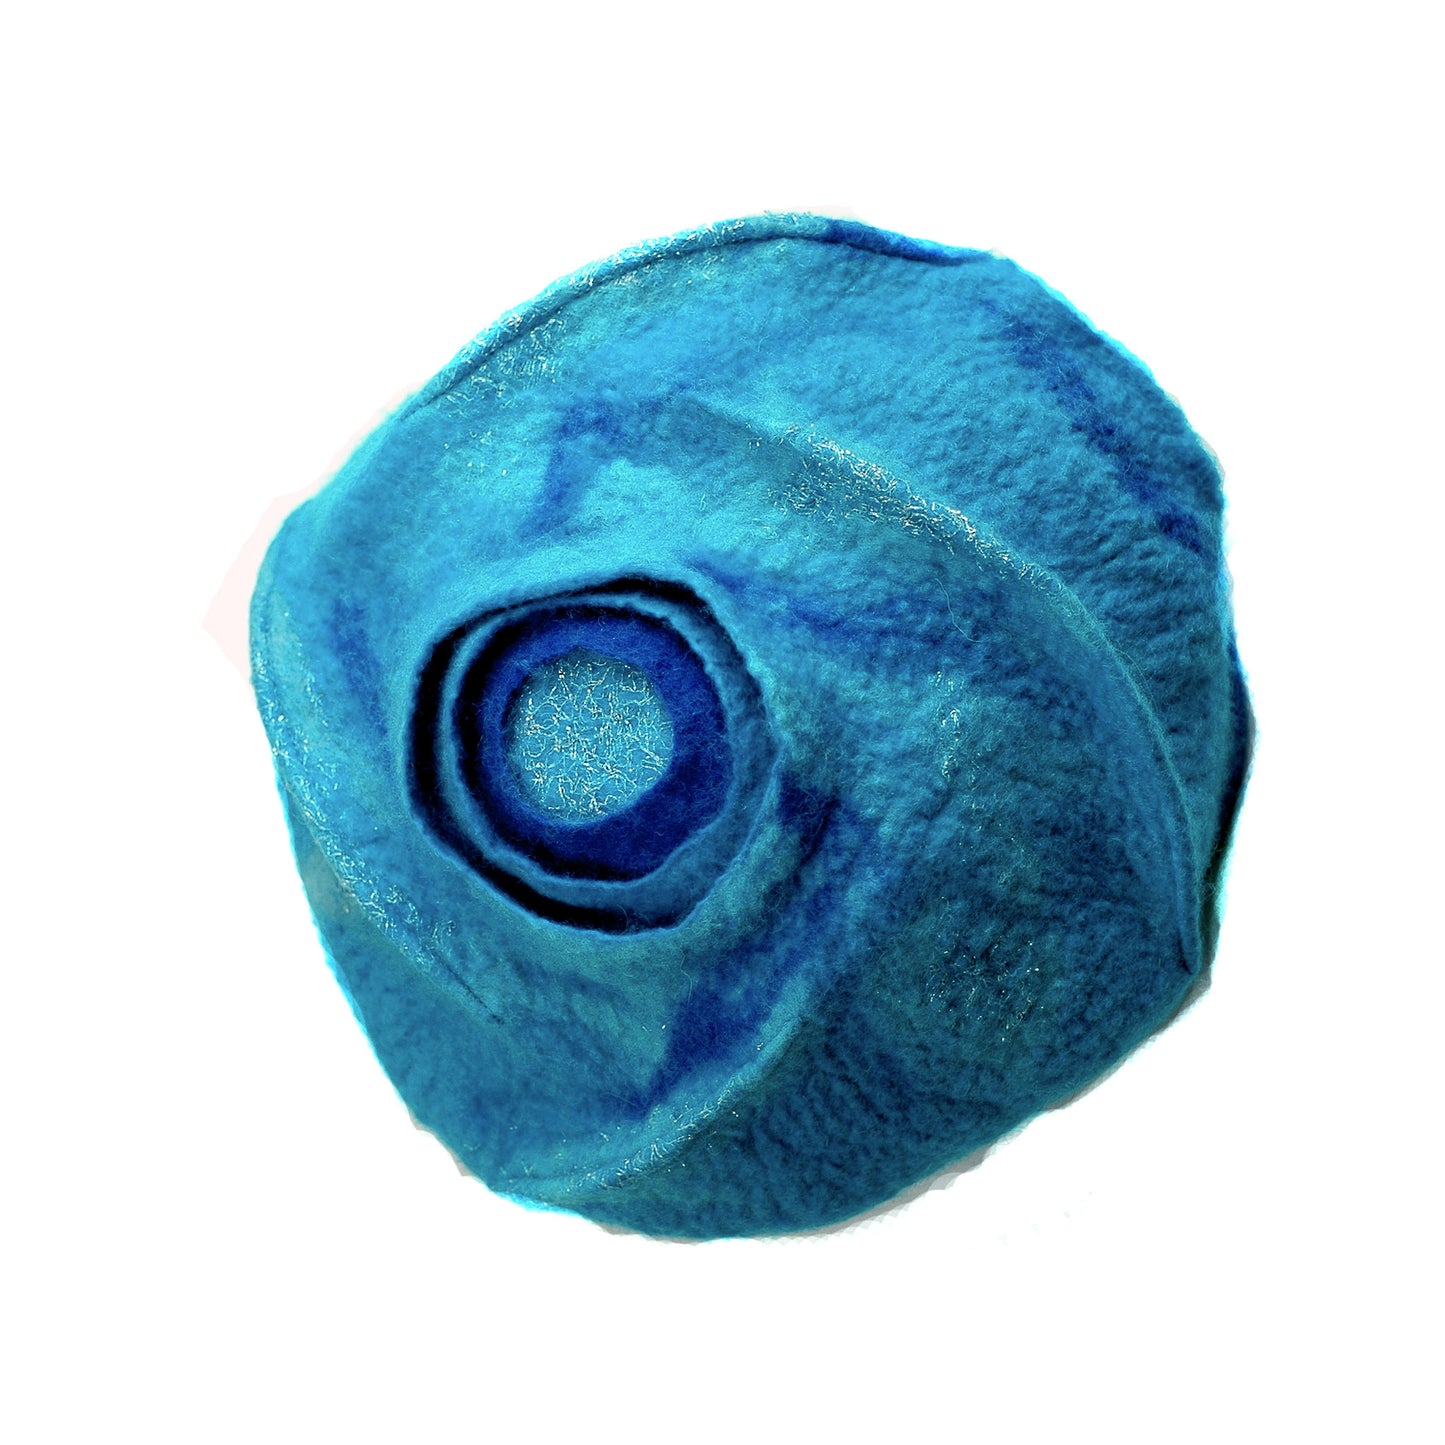 Turquoise Blue Beret with Concentric Circles / Fibonacci Rose on Top - top view